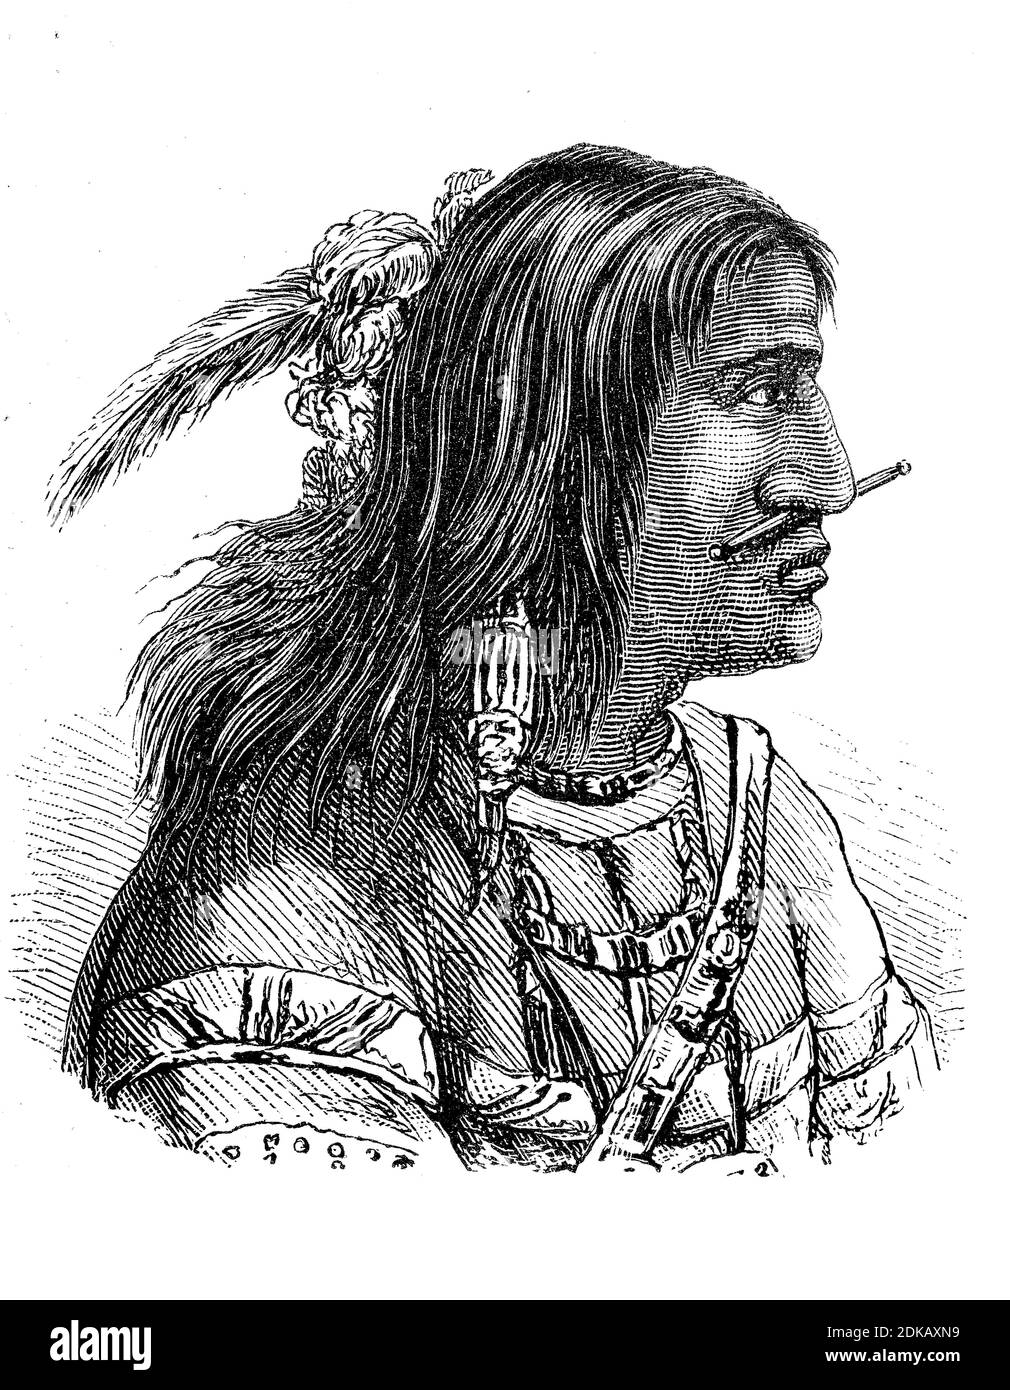 Native American, here a man from the Tananc tribe from Alaska, America, illustration from 1880  /  Indianer, hier ein Mann vom Stamm der Tananc aus Alaska, Amerika, Illustration aus 1880, Historisch, historical, digital improved reproduction of an original from the 19th century / digitale Reproduktion einer Originalvorlage aus dem 19. Jahrhundert Stock Photo